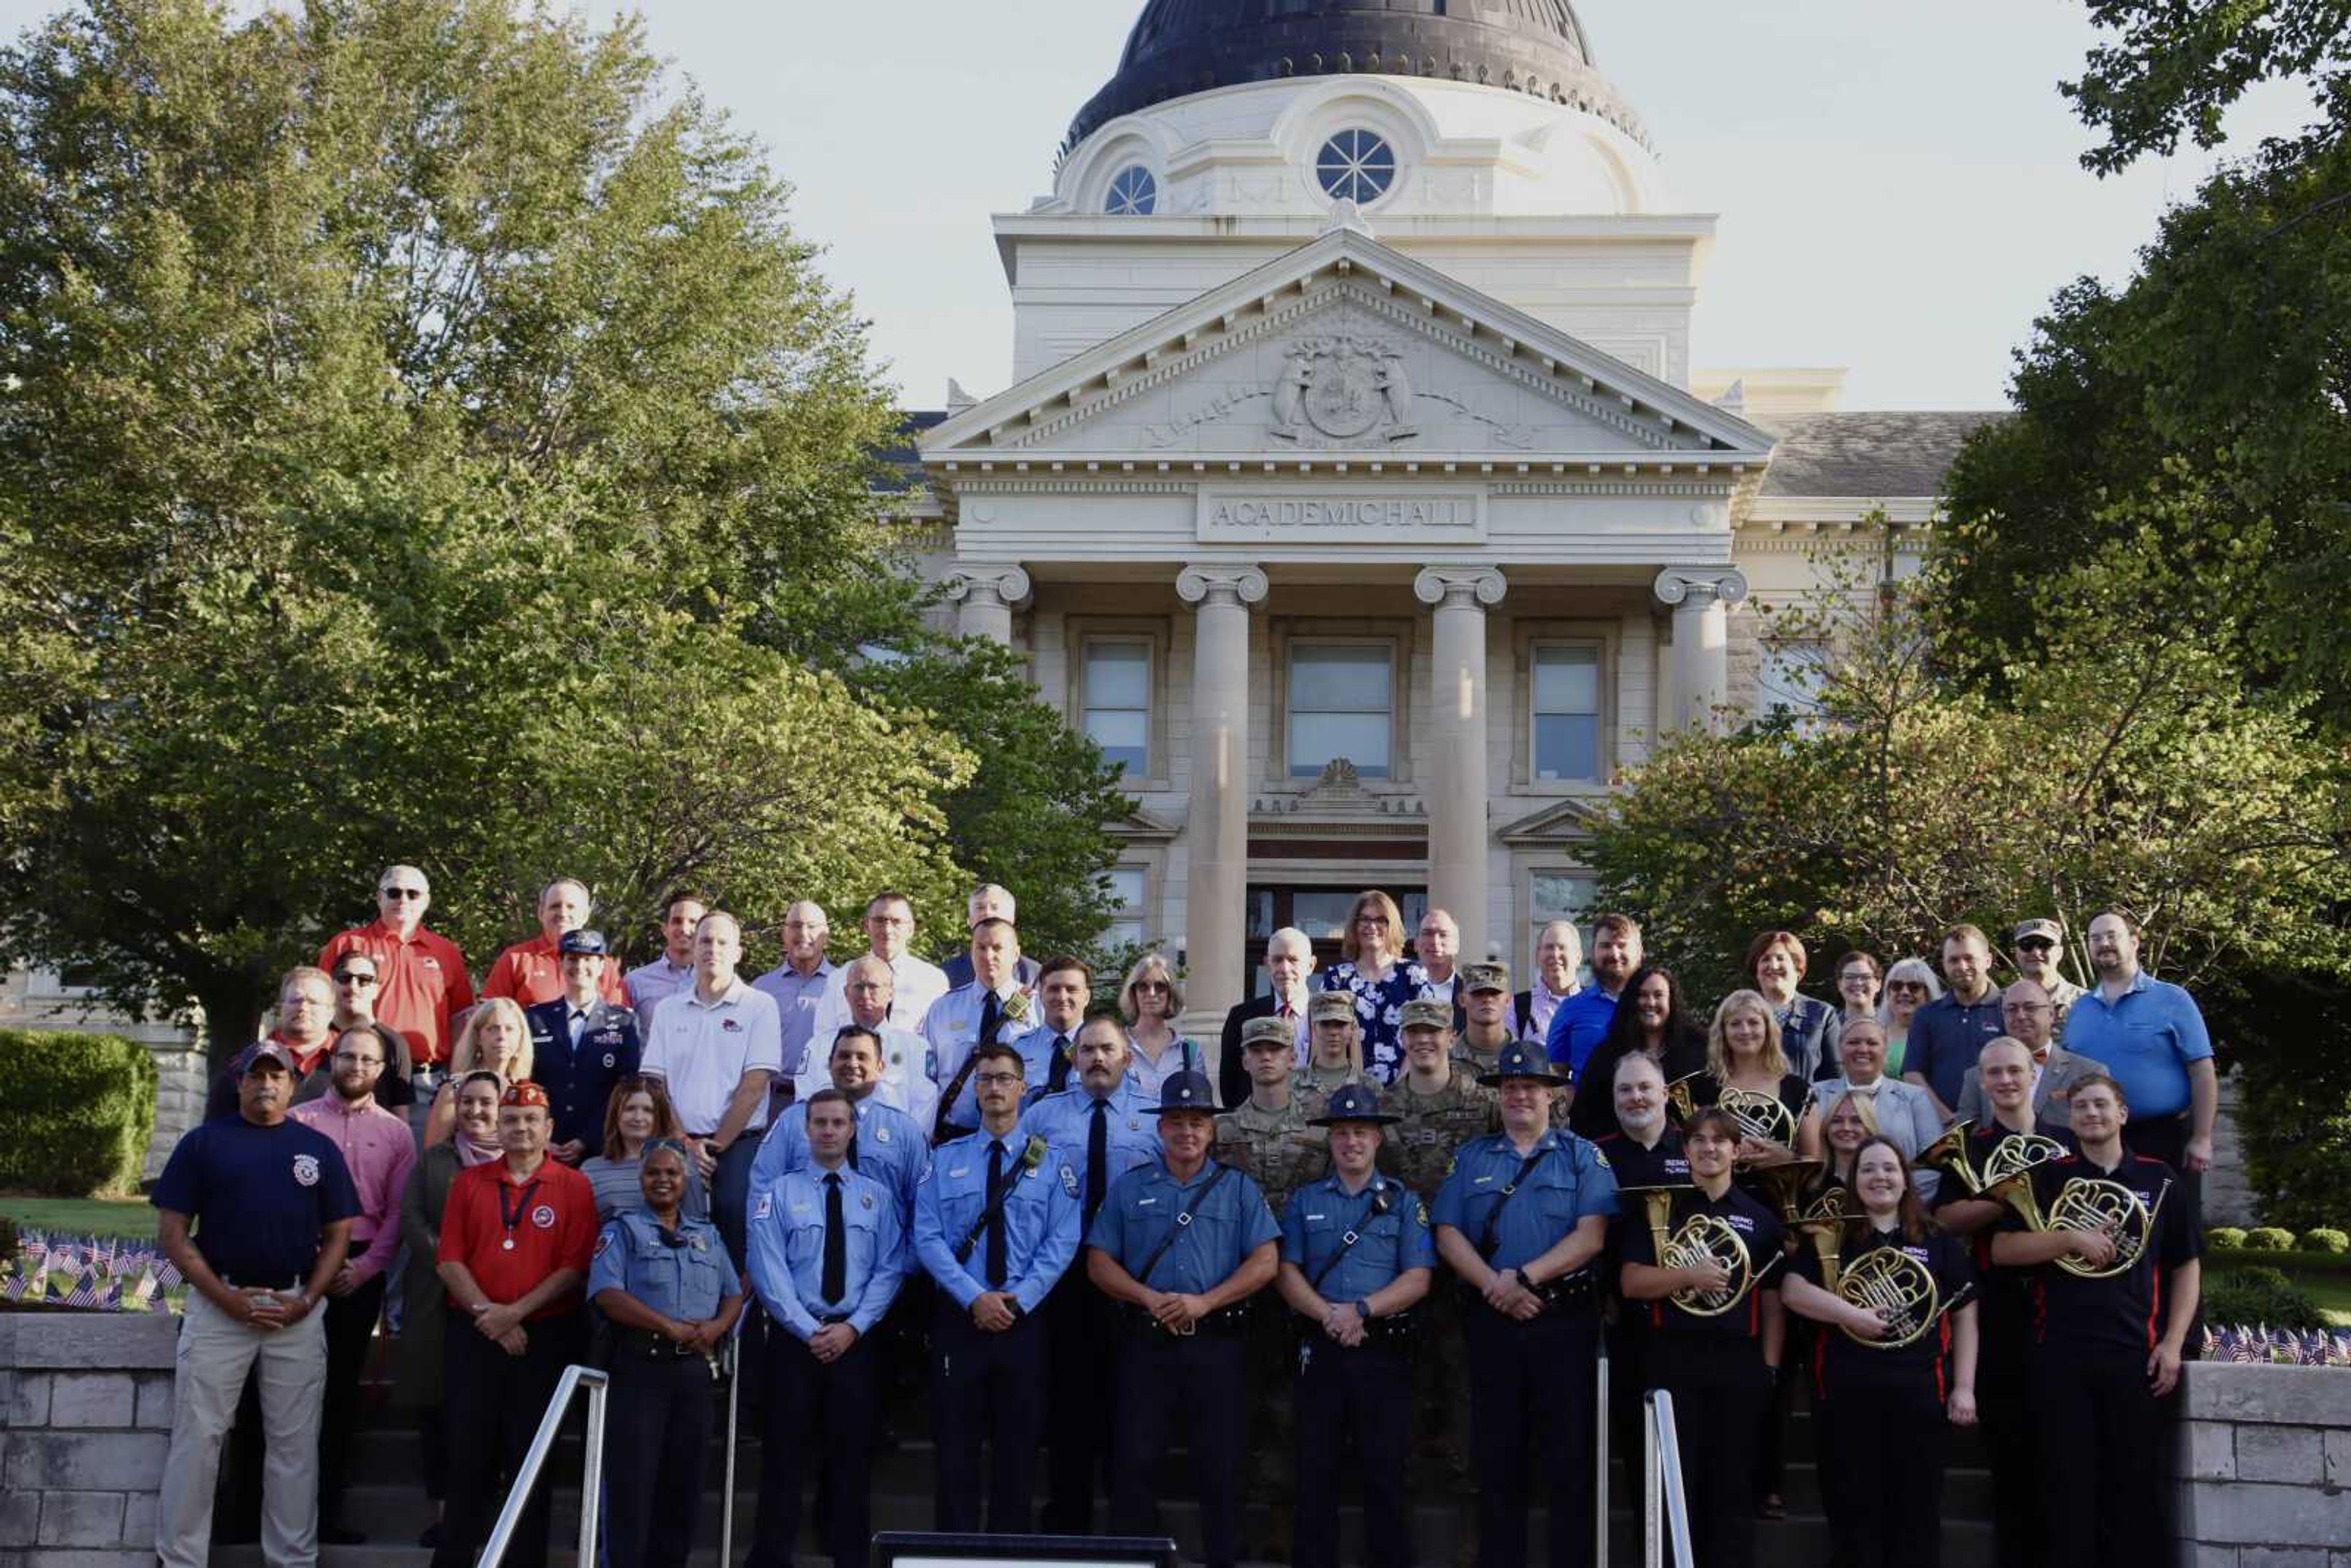 Cape Girardeau service members, first responders, ROTC Air Force and University Staff gather the morning of 9/11 in front of Academic Hall at Southeast Missouri State University.